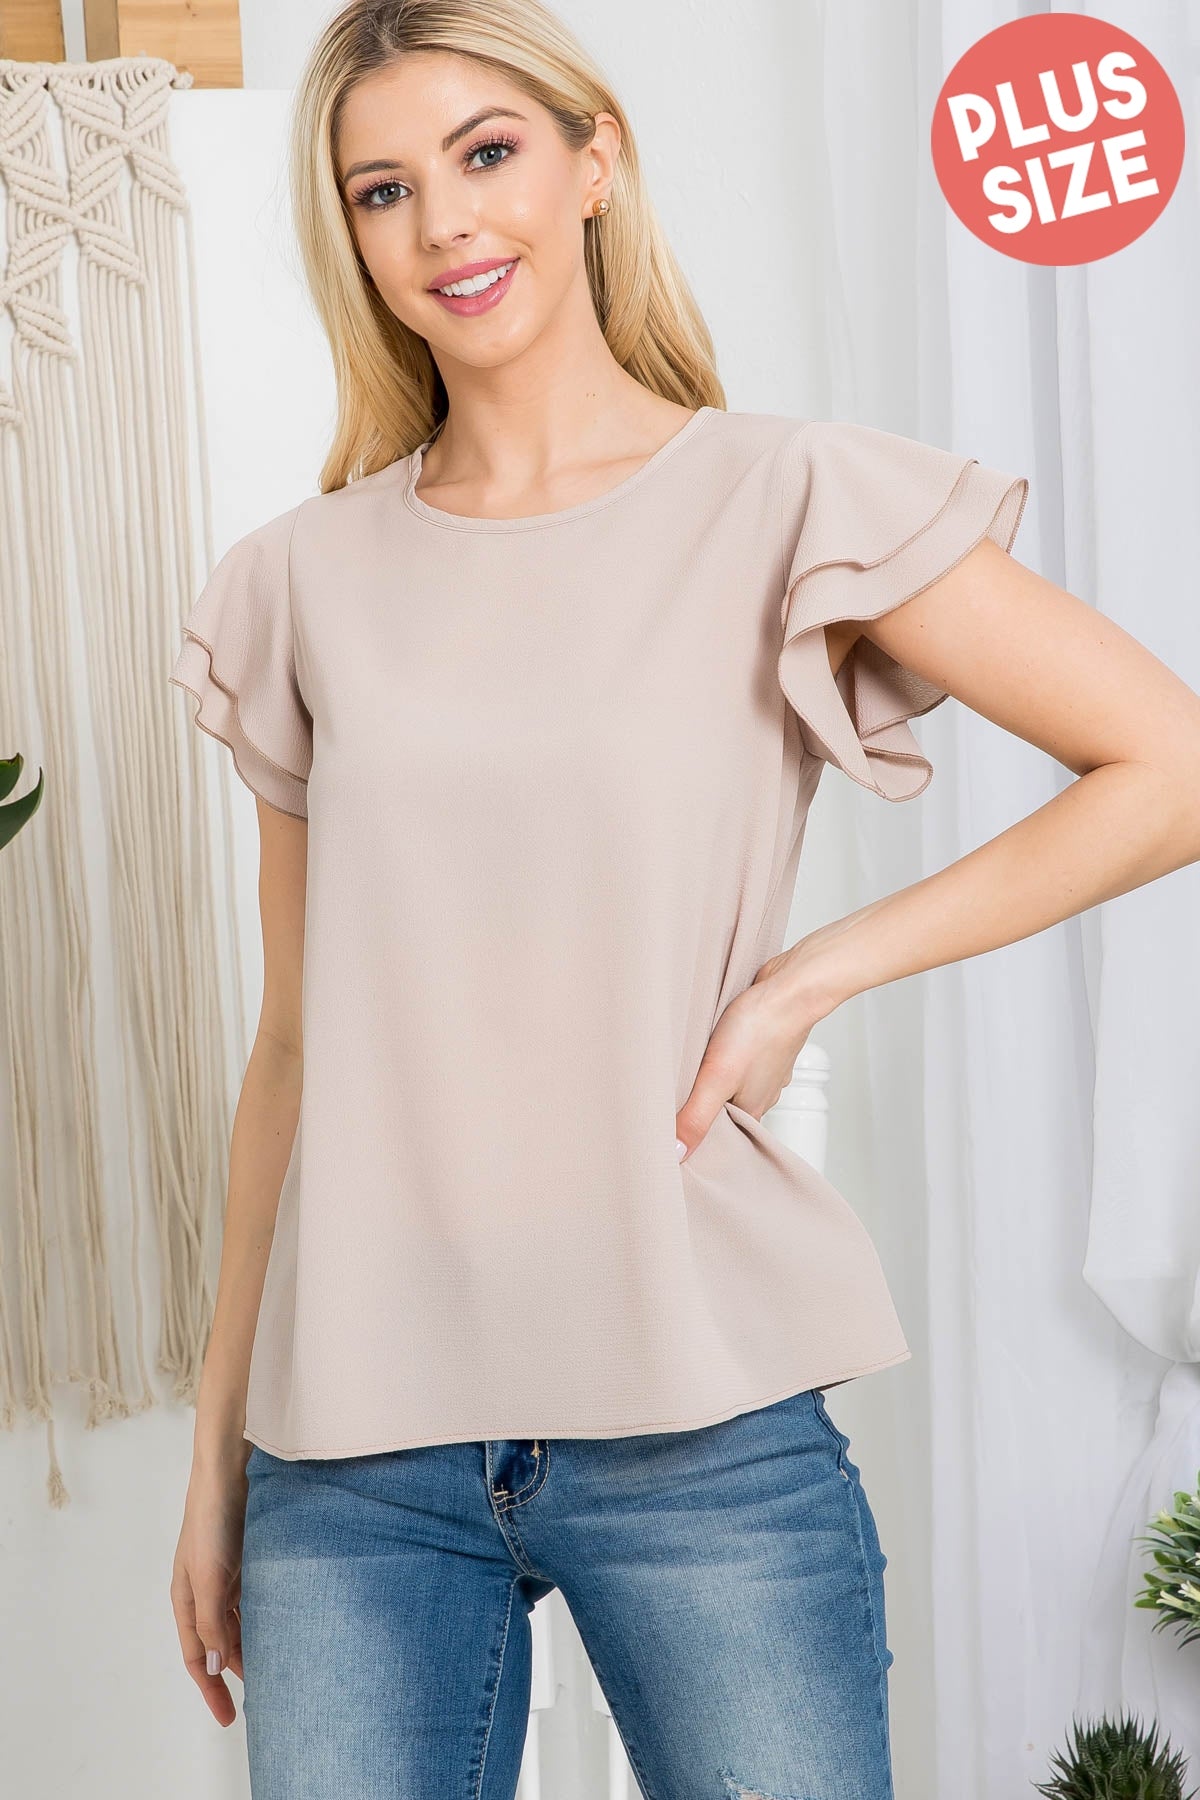 LAYERED RUFFLE SLEEVE ROUND NECK WOVEN TOP 3-2-1